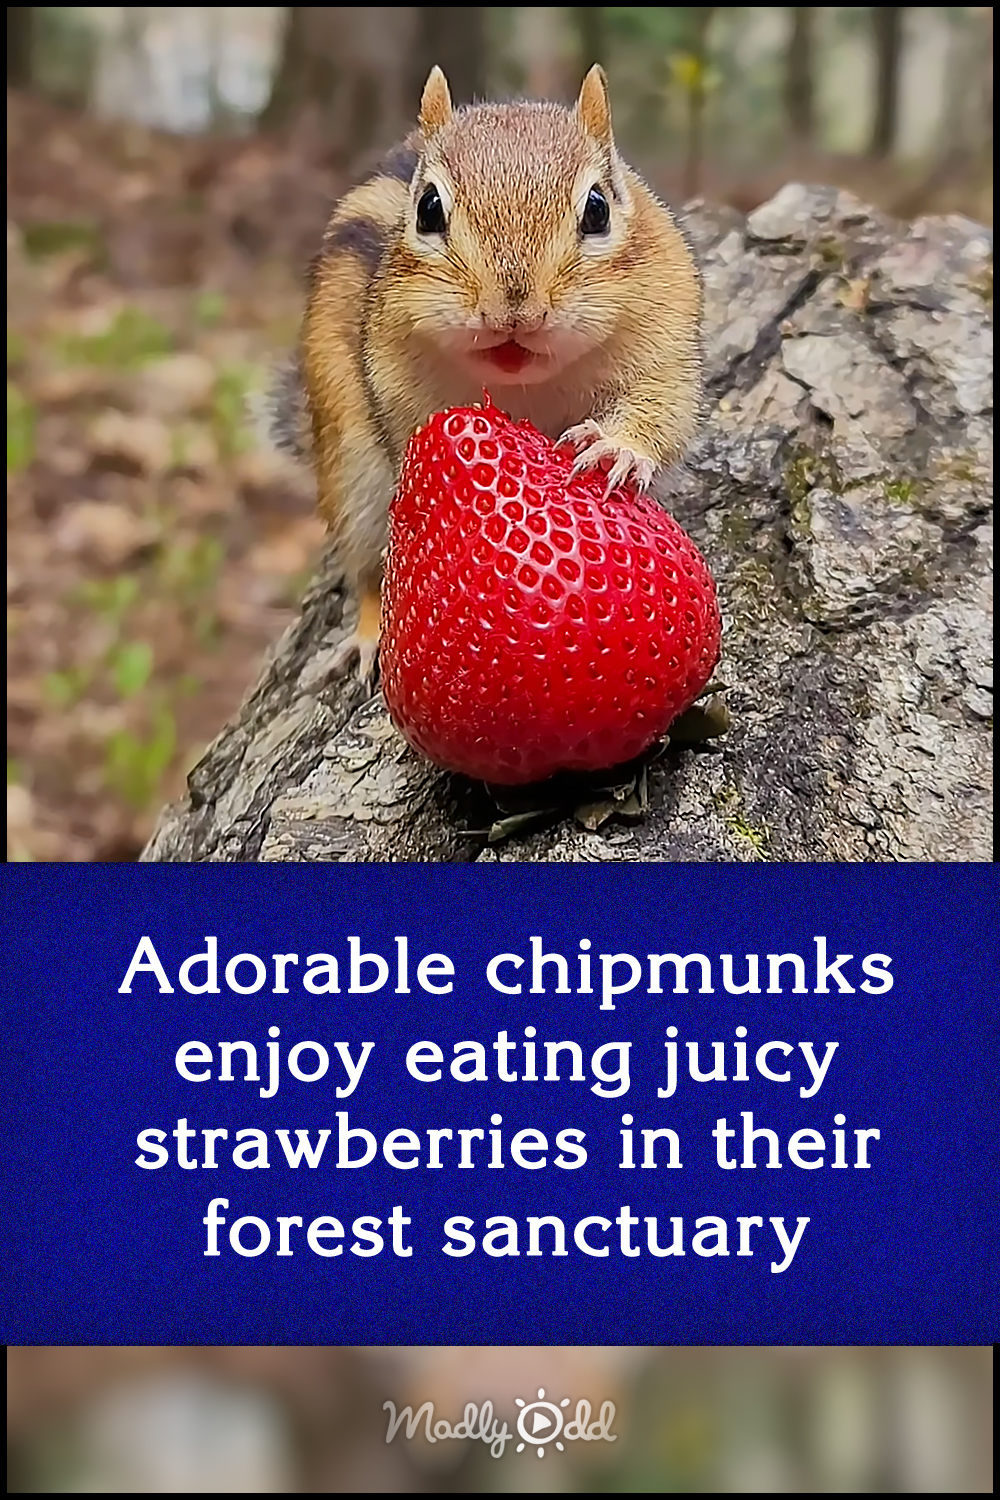 Adorable chipmunks enjoy eating juicy strawberries in their forest sanctuary